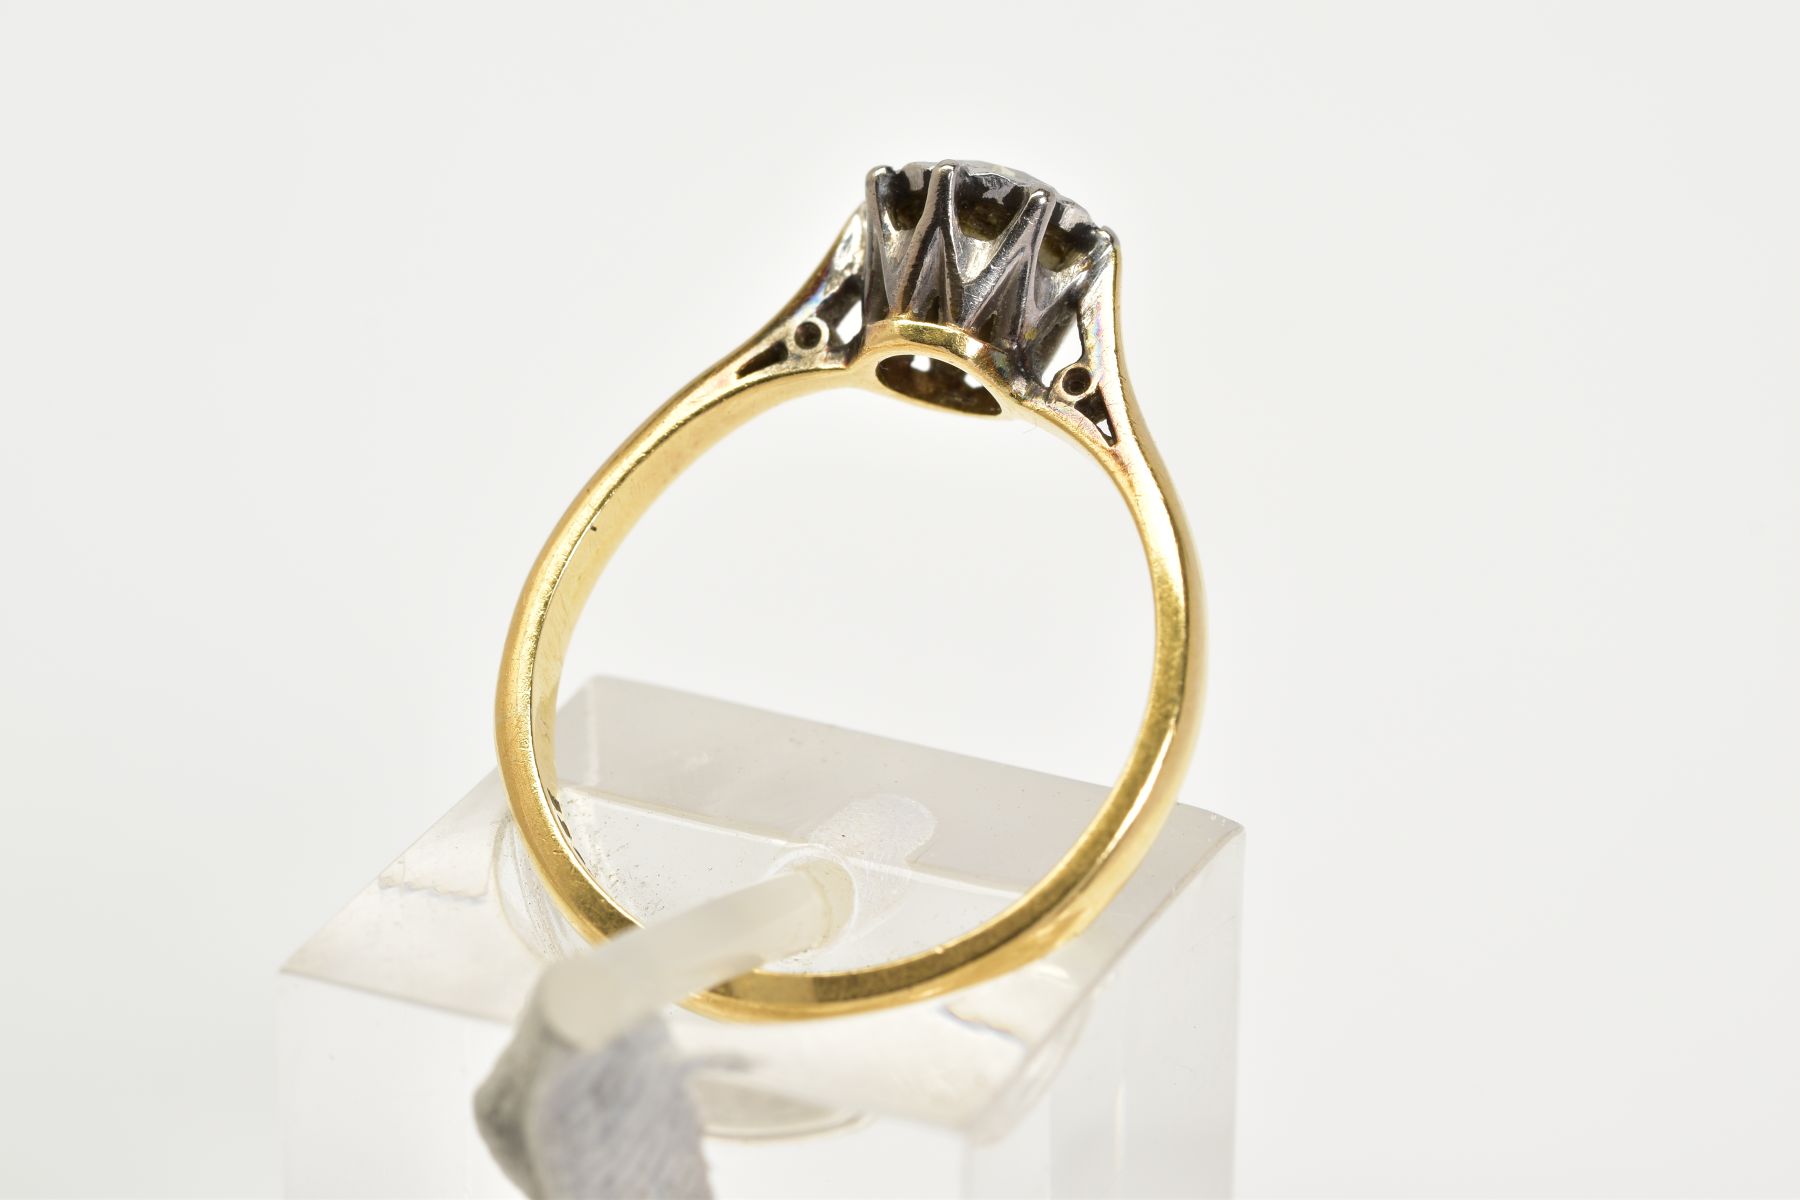 A SINGLE STONE DIAMOND RING, the yellow metal ring set with a single round brilliant cut diamond, - Image 3 of 3